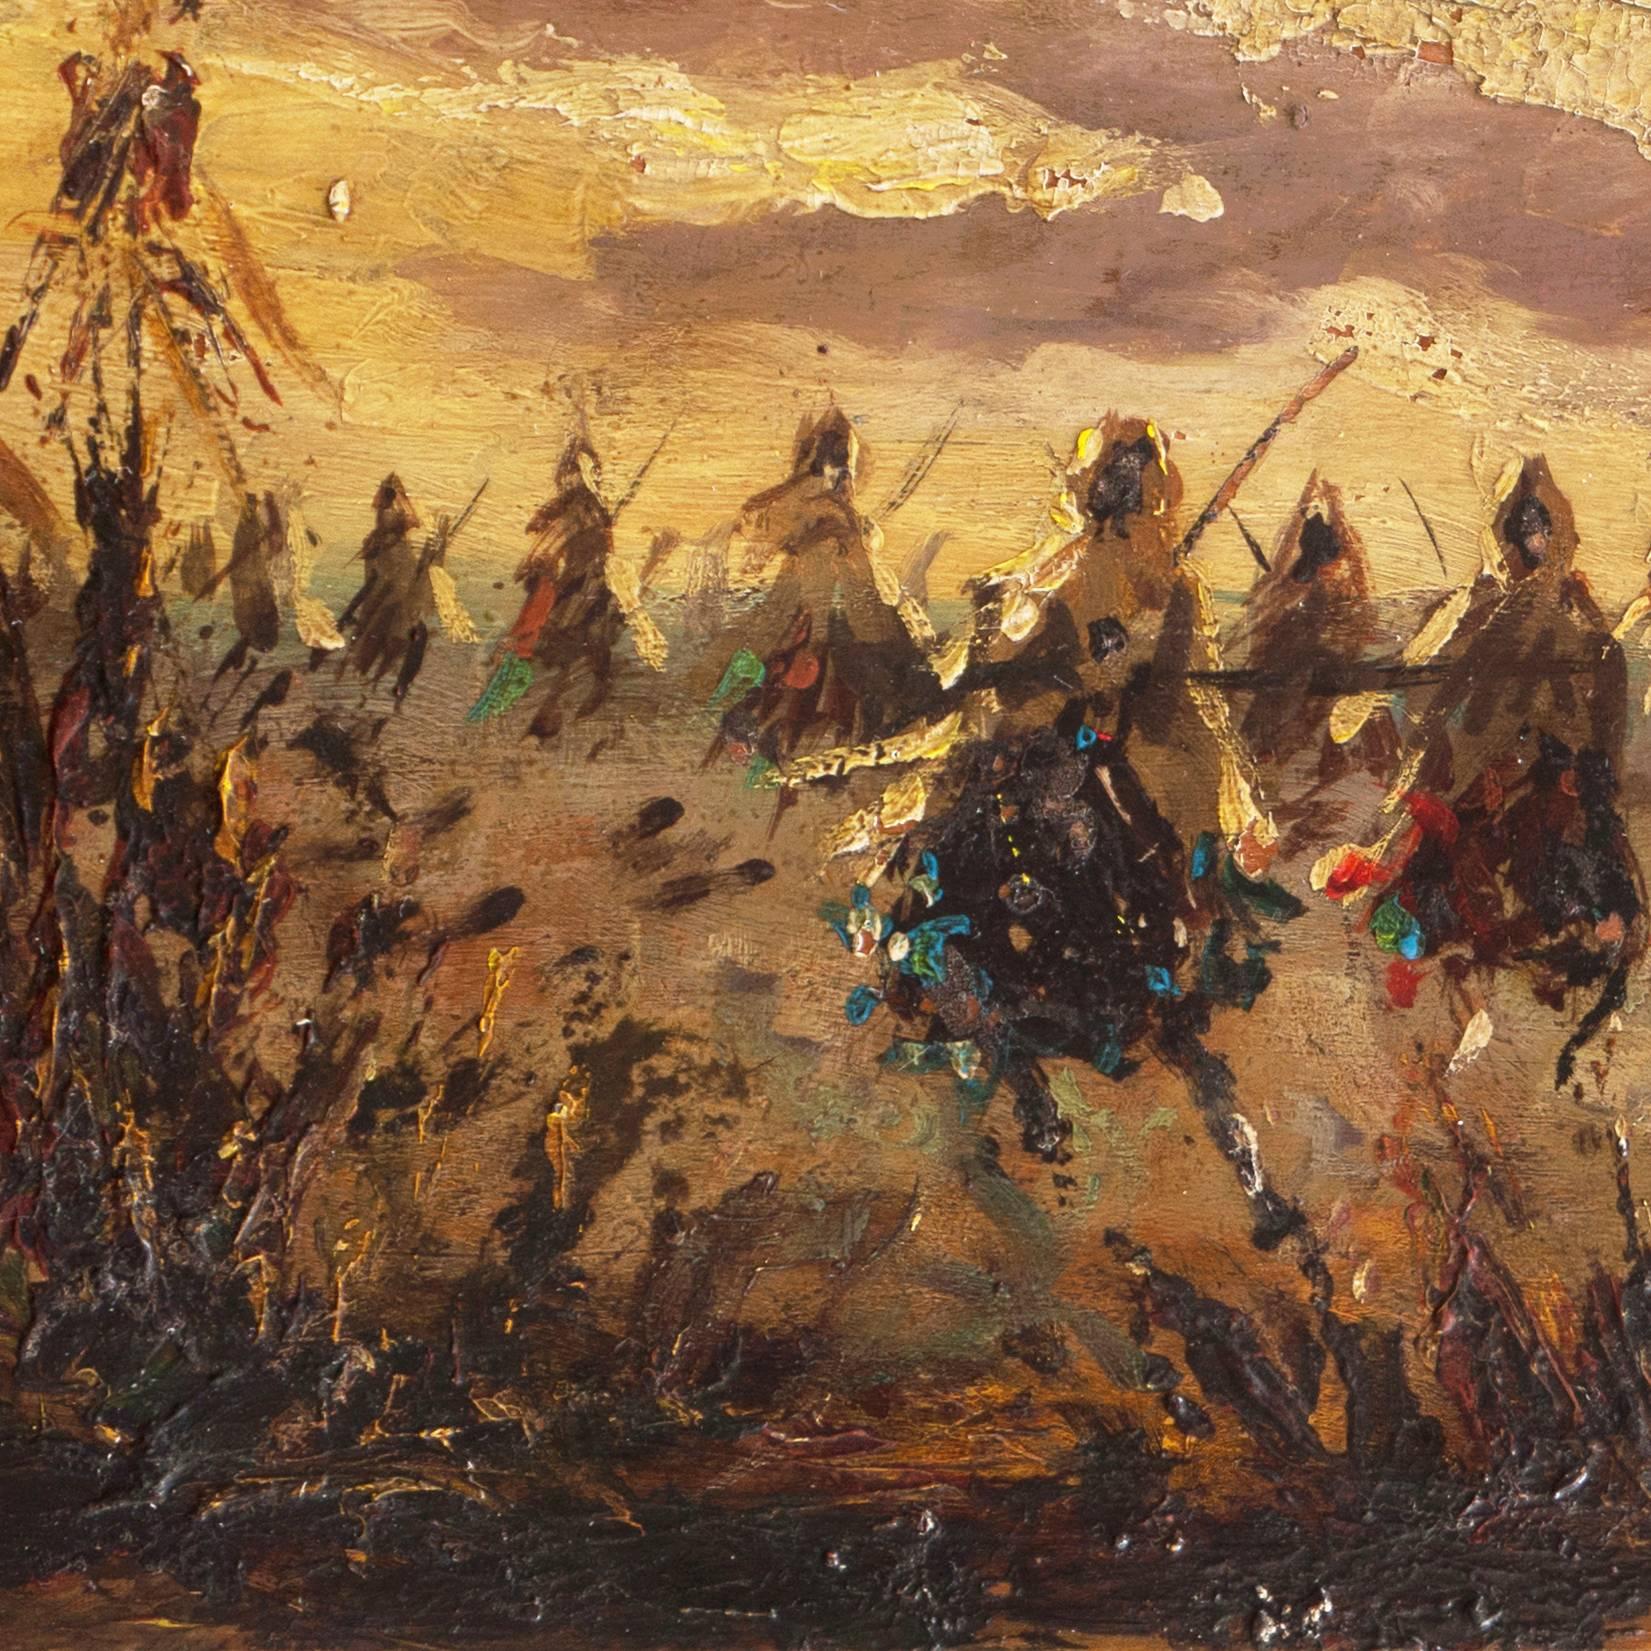 Indistinctly signed lower left and painted circa 1870. 

A dramatic French Orientalist view of a line of mounted Berber warriors shown charging towards the viewer. A colorful work showing the white-robed warriors galloping on their gaily-caparisoned